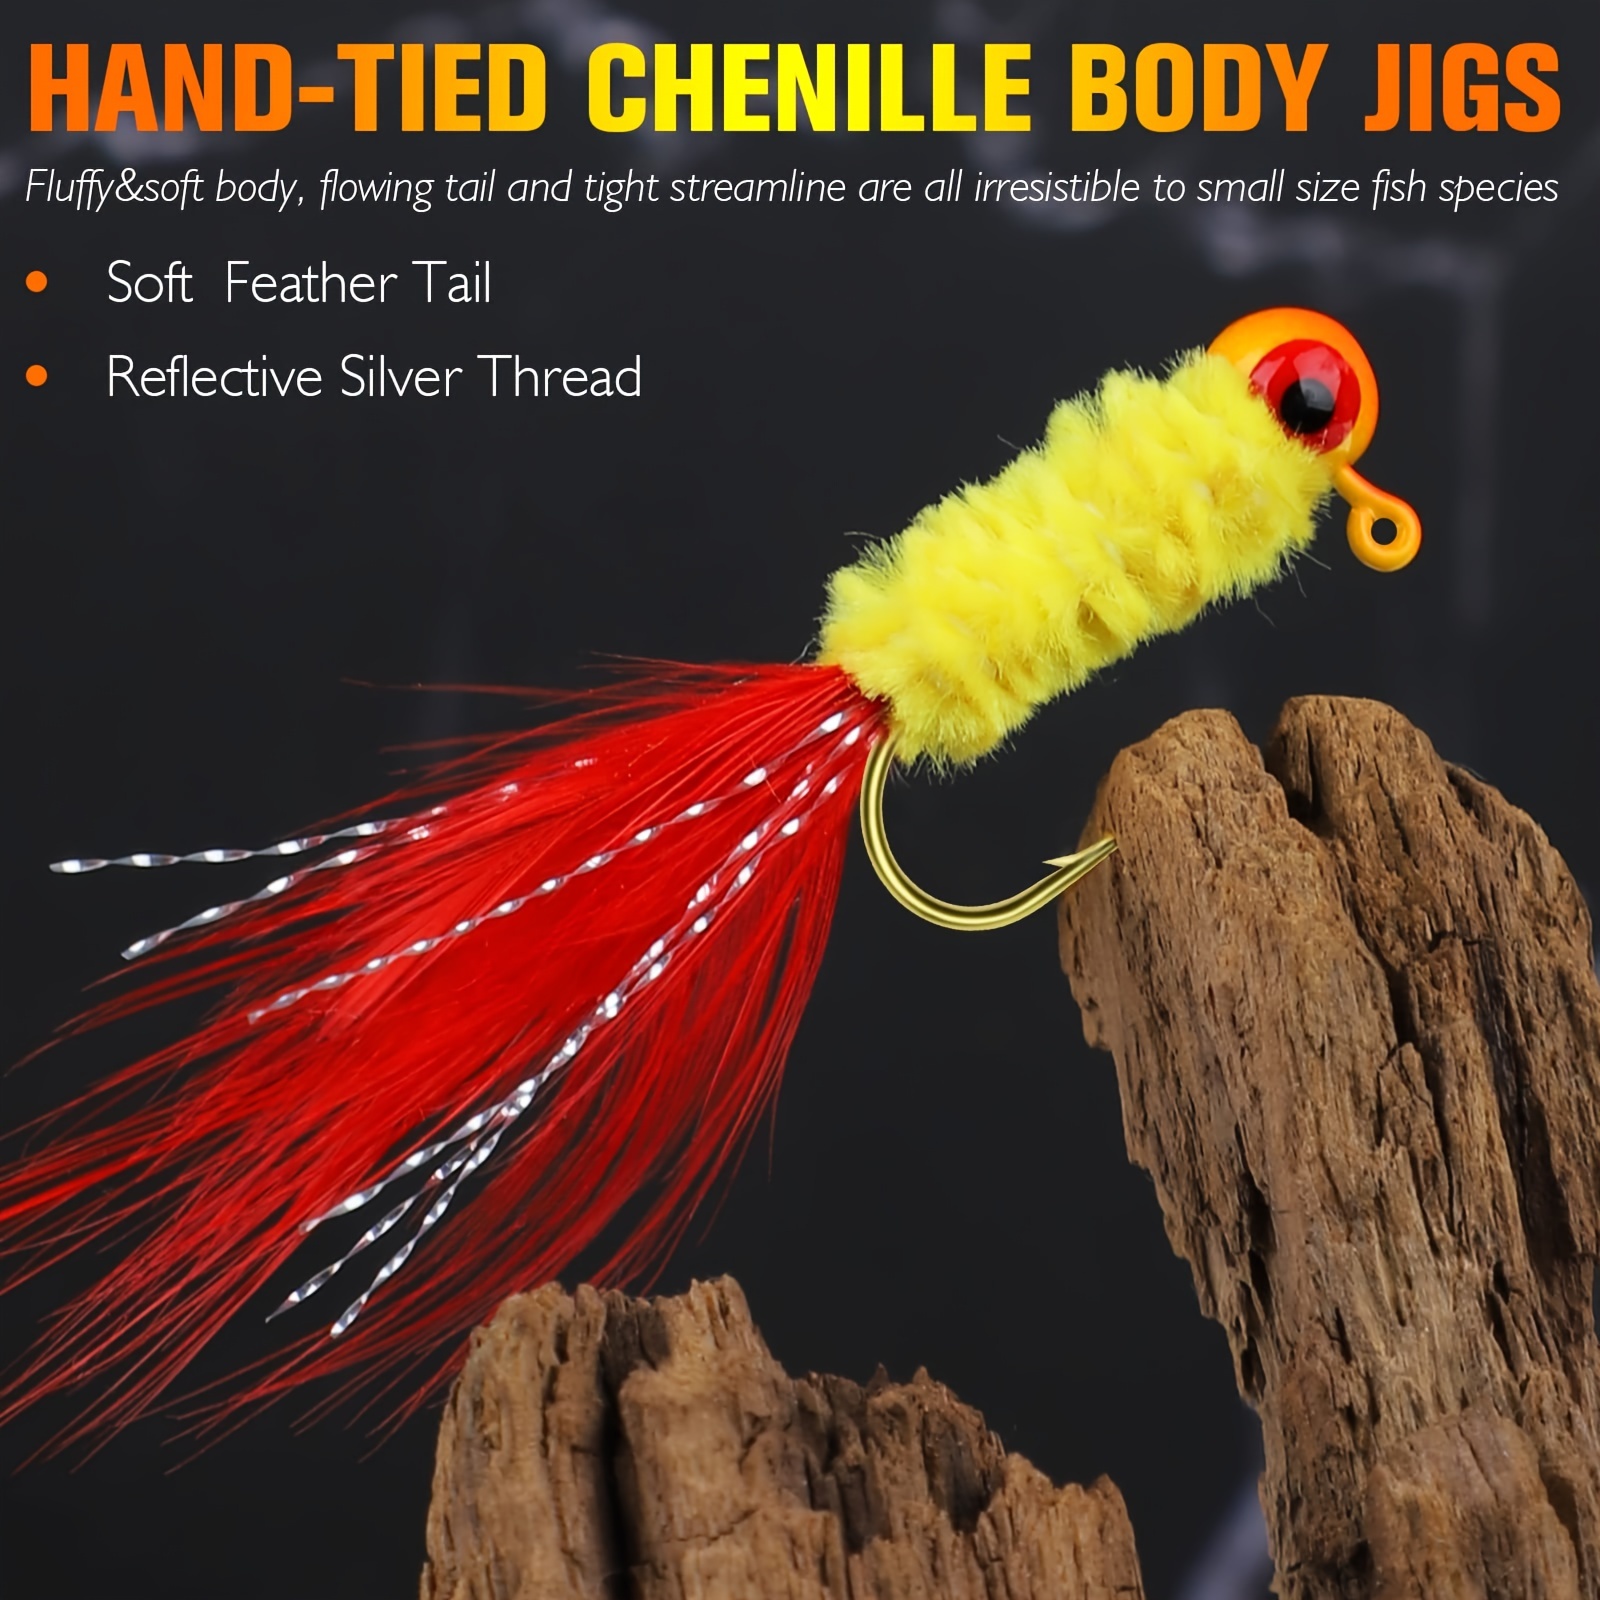 * 10pcs 0.8/1.75g (0.03/0.06oz ) Crappie Jigs, Jig Heads Fishing Bait With  Feather For Ice Or Fly Fishing, Fishing Hair Jigs For Panfish Sunfish